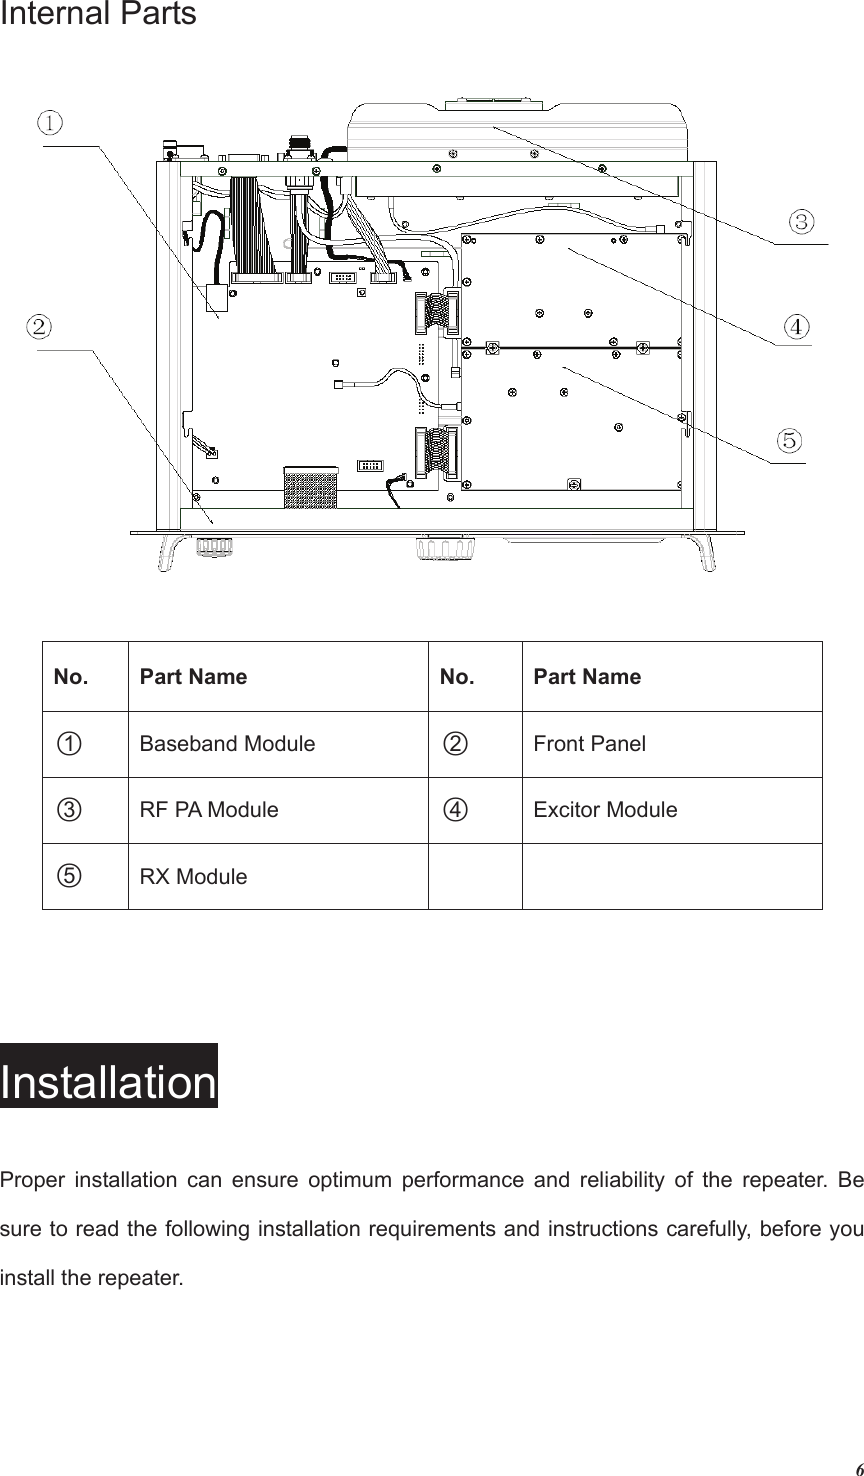 6Internal PartsNo. Part Name No. Part Nameƻ1Baseband Module  ƻ2Front Panel   ƻ3RF PA Module  ƻ4Excitor Module ƻ5  RX Module     InstallationProper installation can ensure optimum performance and reliability of the repeater. Be sure to read the following installation requirements and instructions carefully, before you install the repeater. 